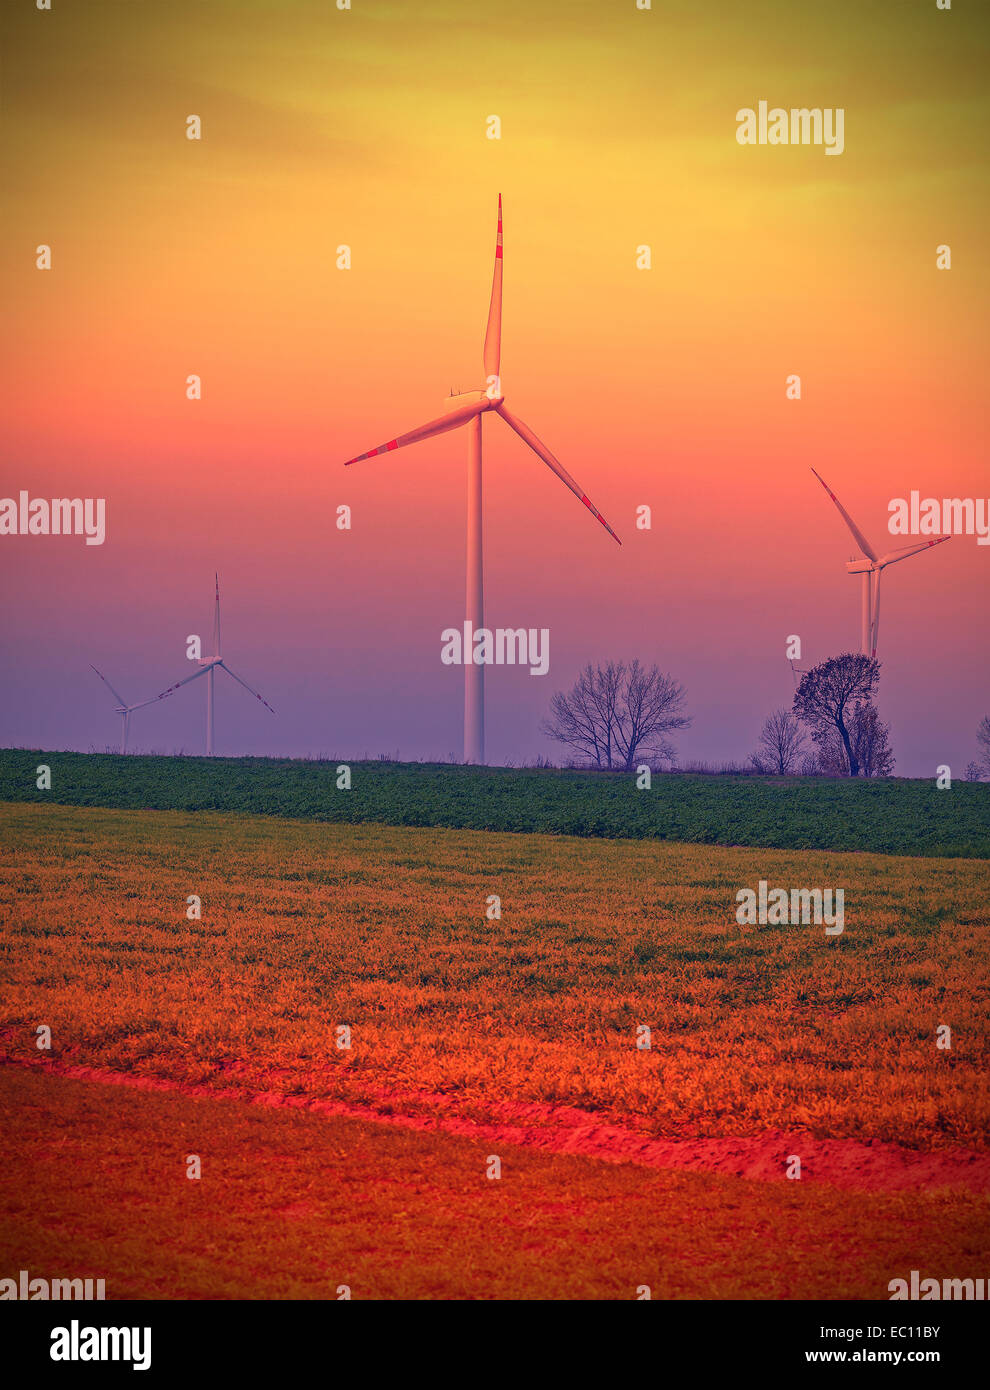 Windmills on field, abstract colors stylized. Stock Photo